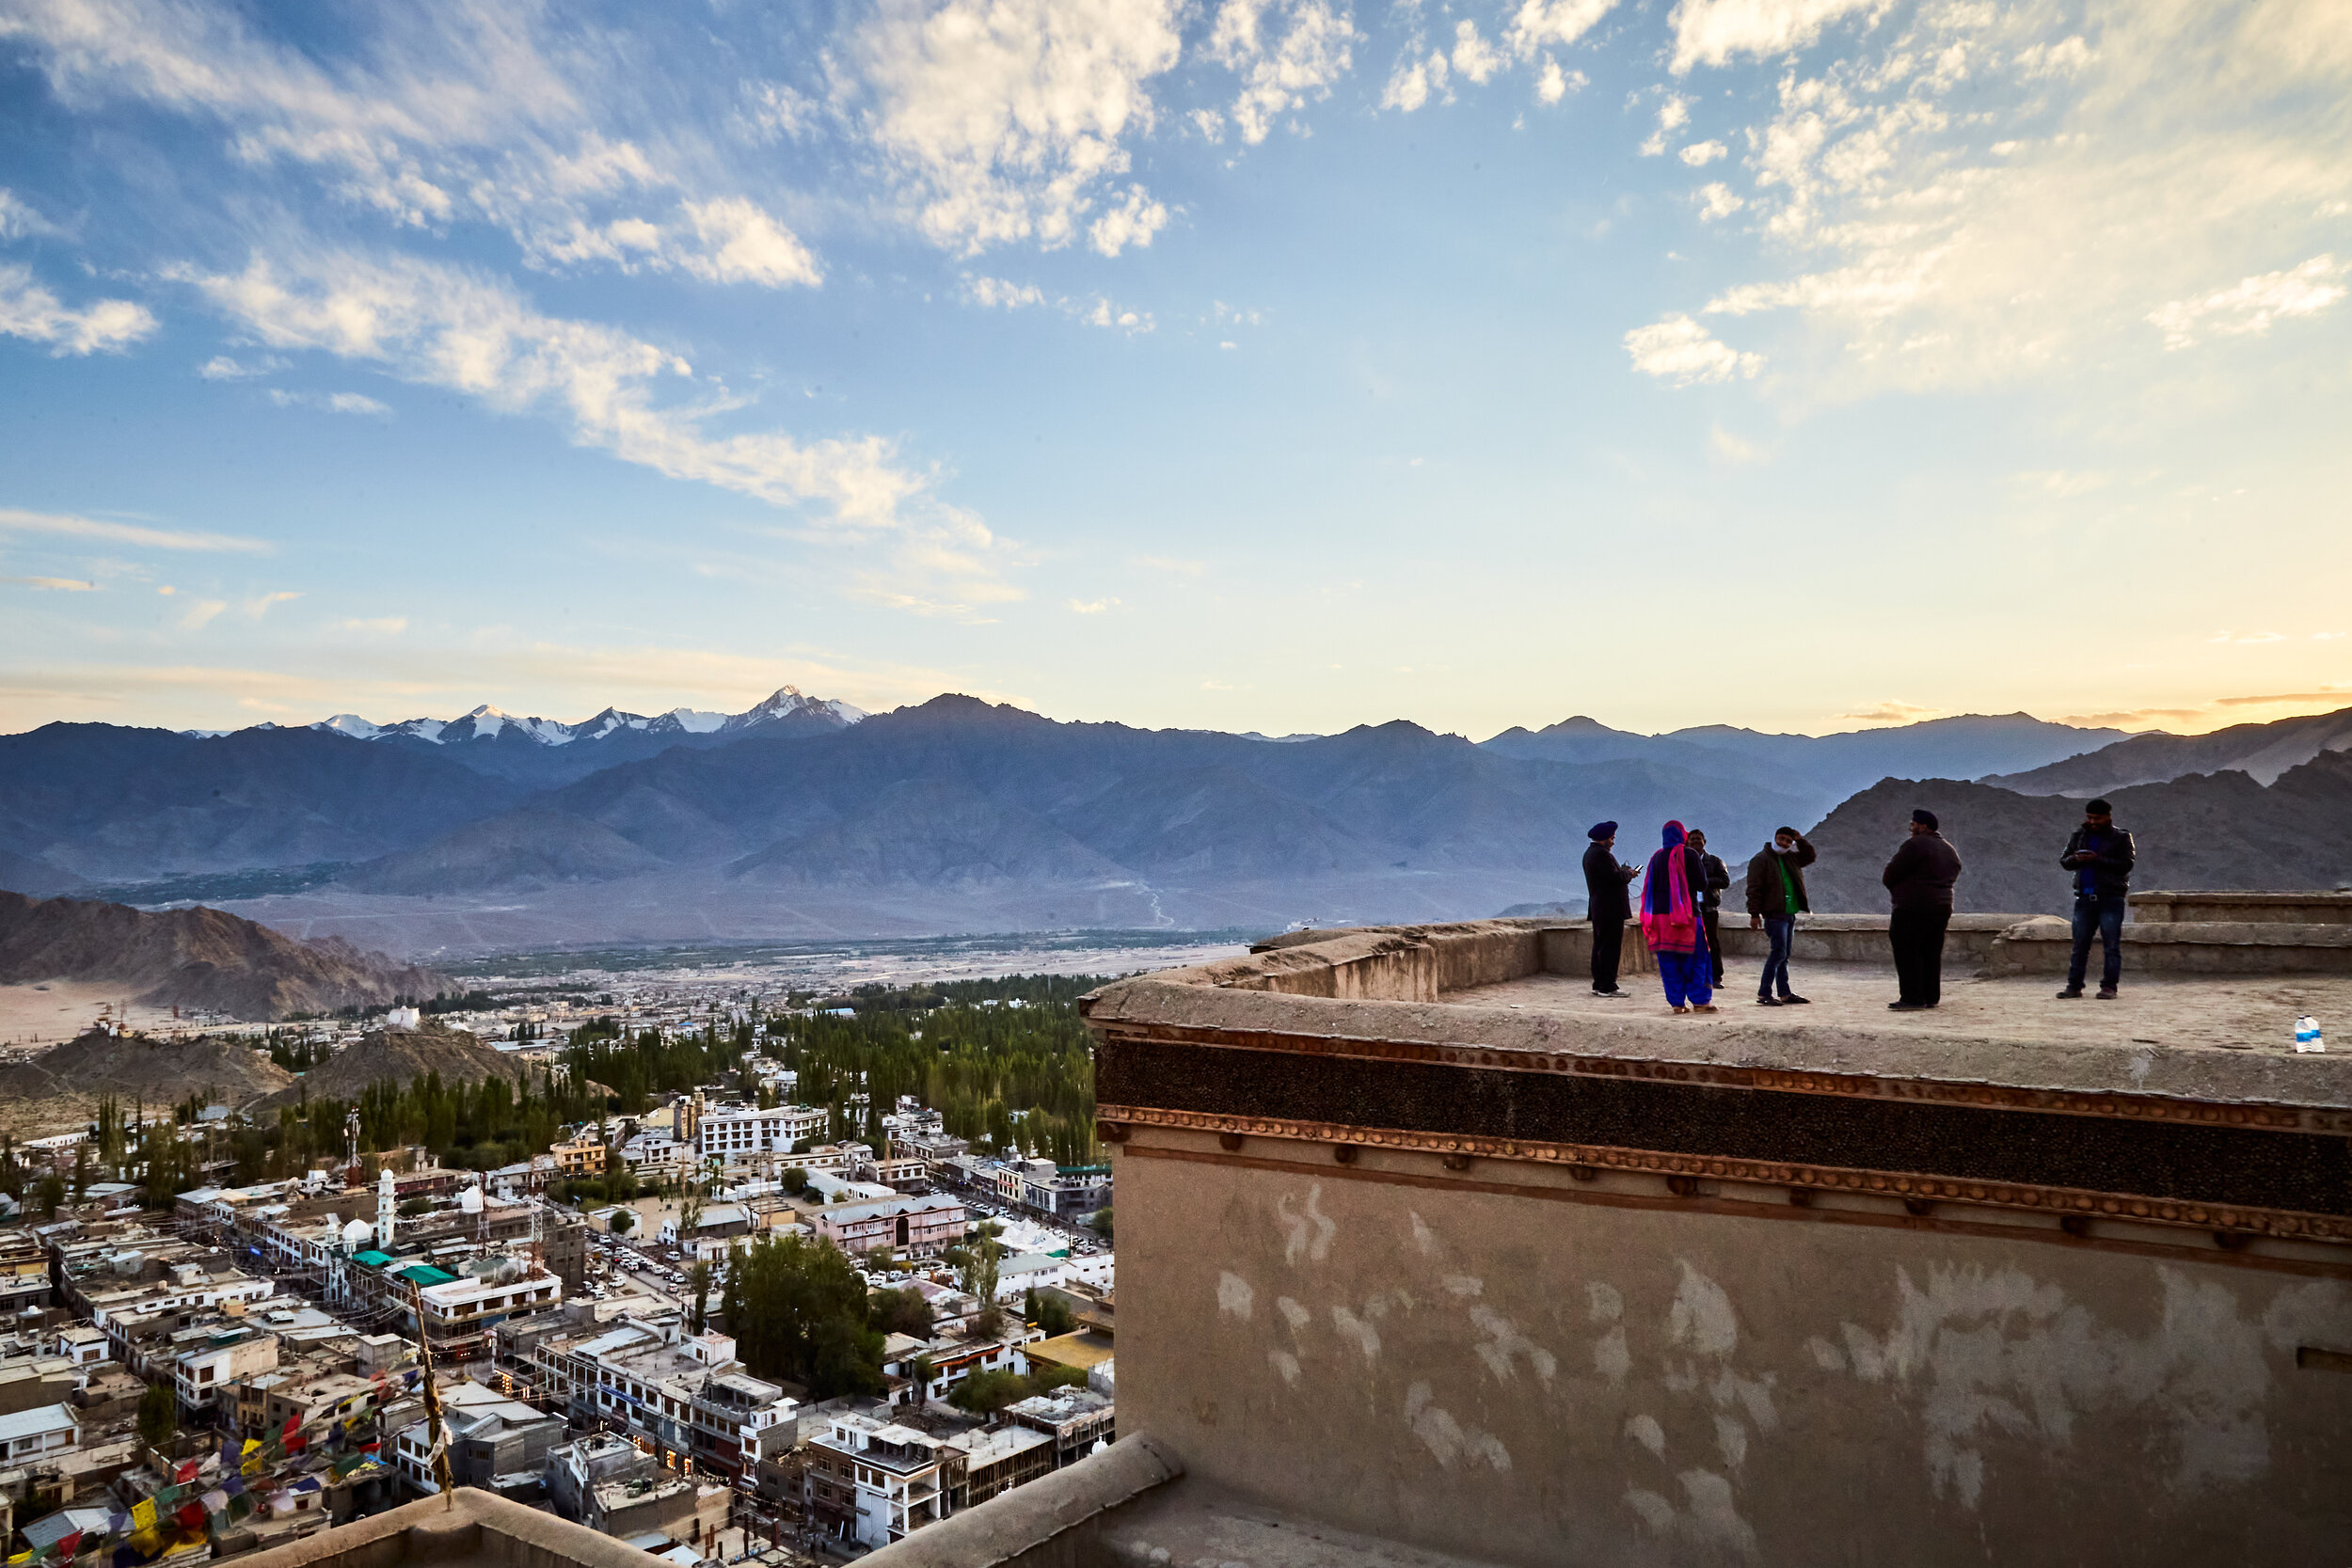  Tourists standing on the top of Leh palace. In the recent past this Himalayan outpost has become a popular tourist destination for the majority local tourists, thanks to several movies shot in the region. 